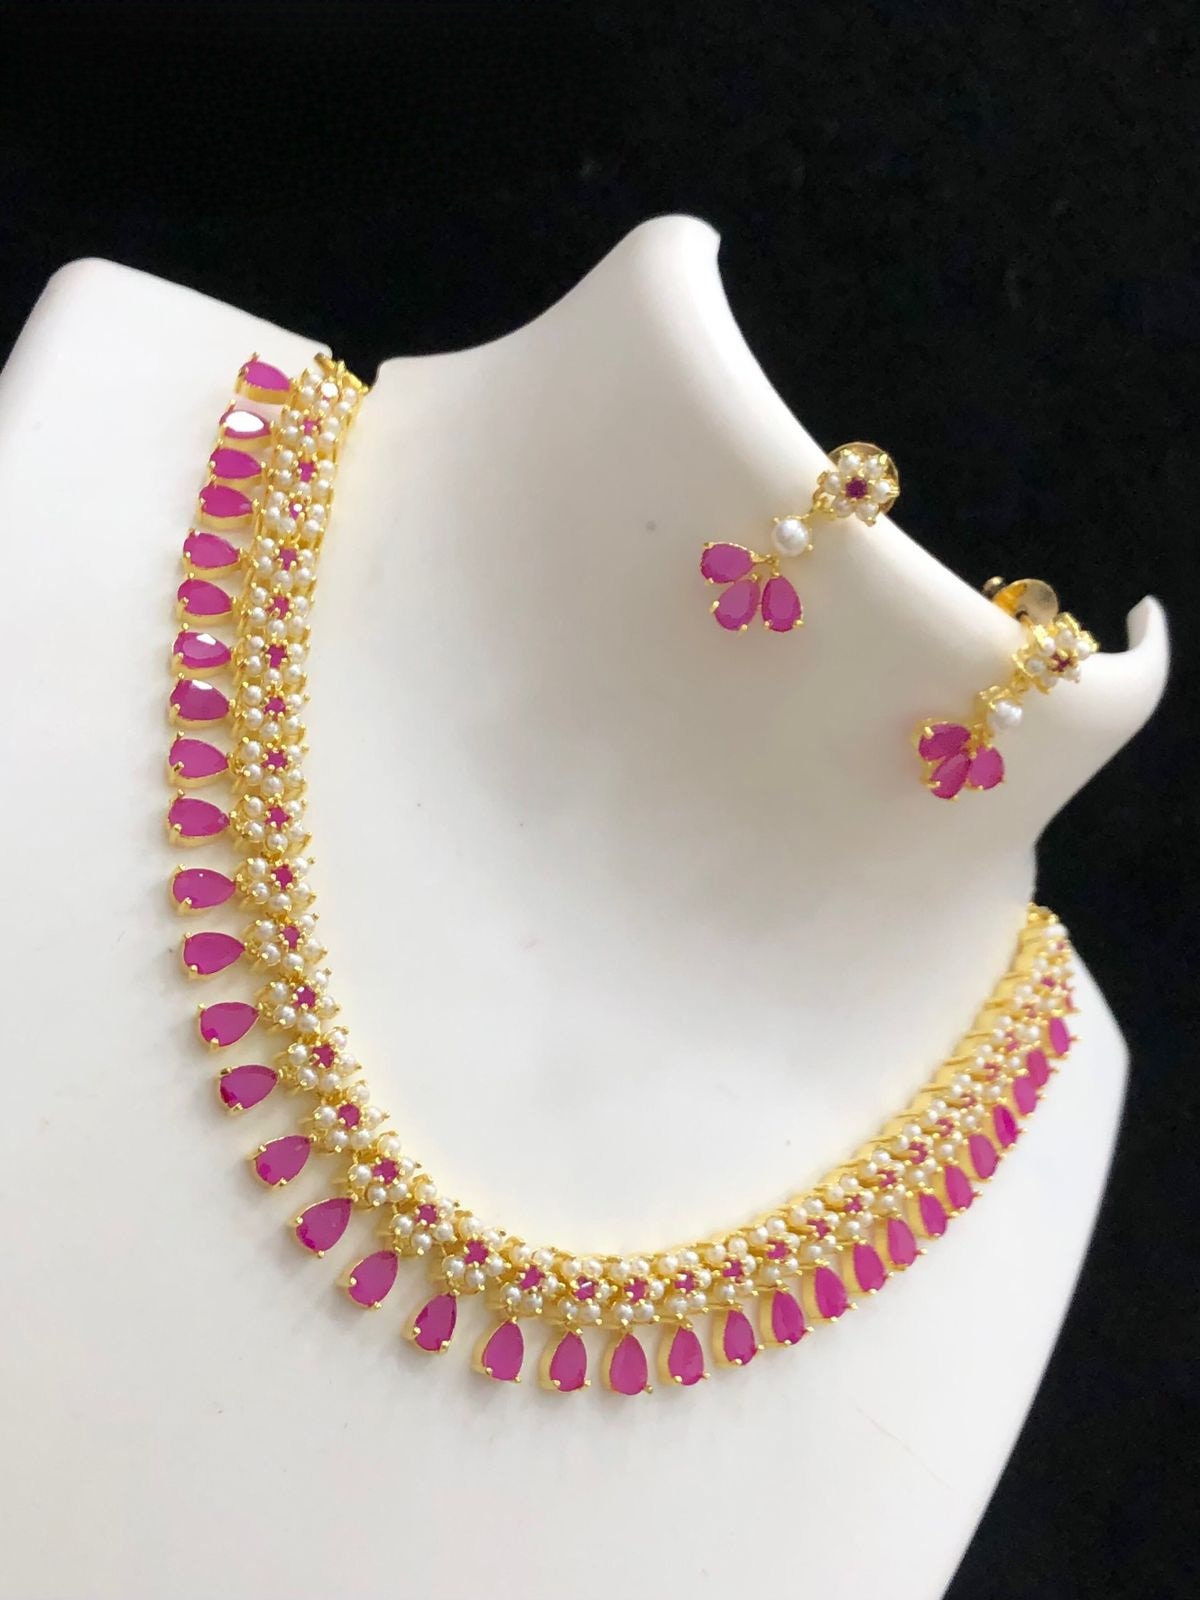 Pearl and Cz American Diamond Necklace | Indian Jewelry | Pearl and pear floral design necklace earring set